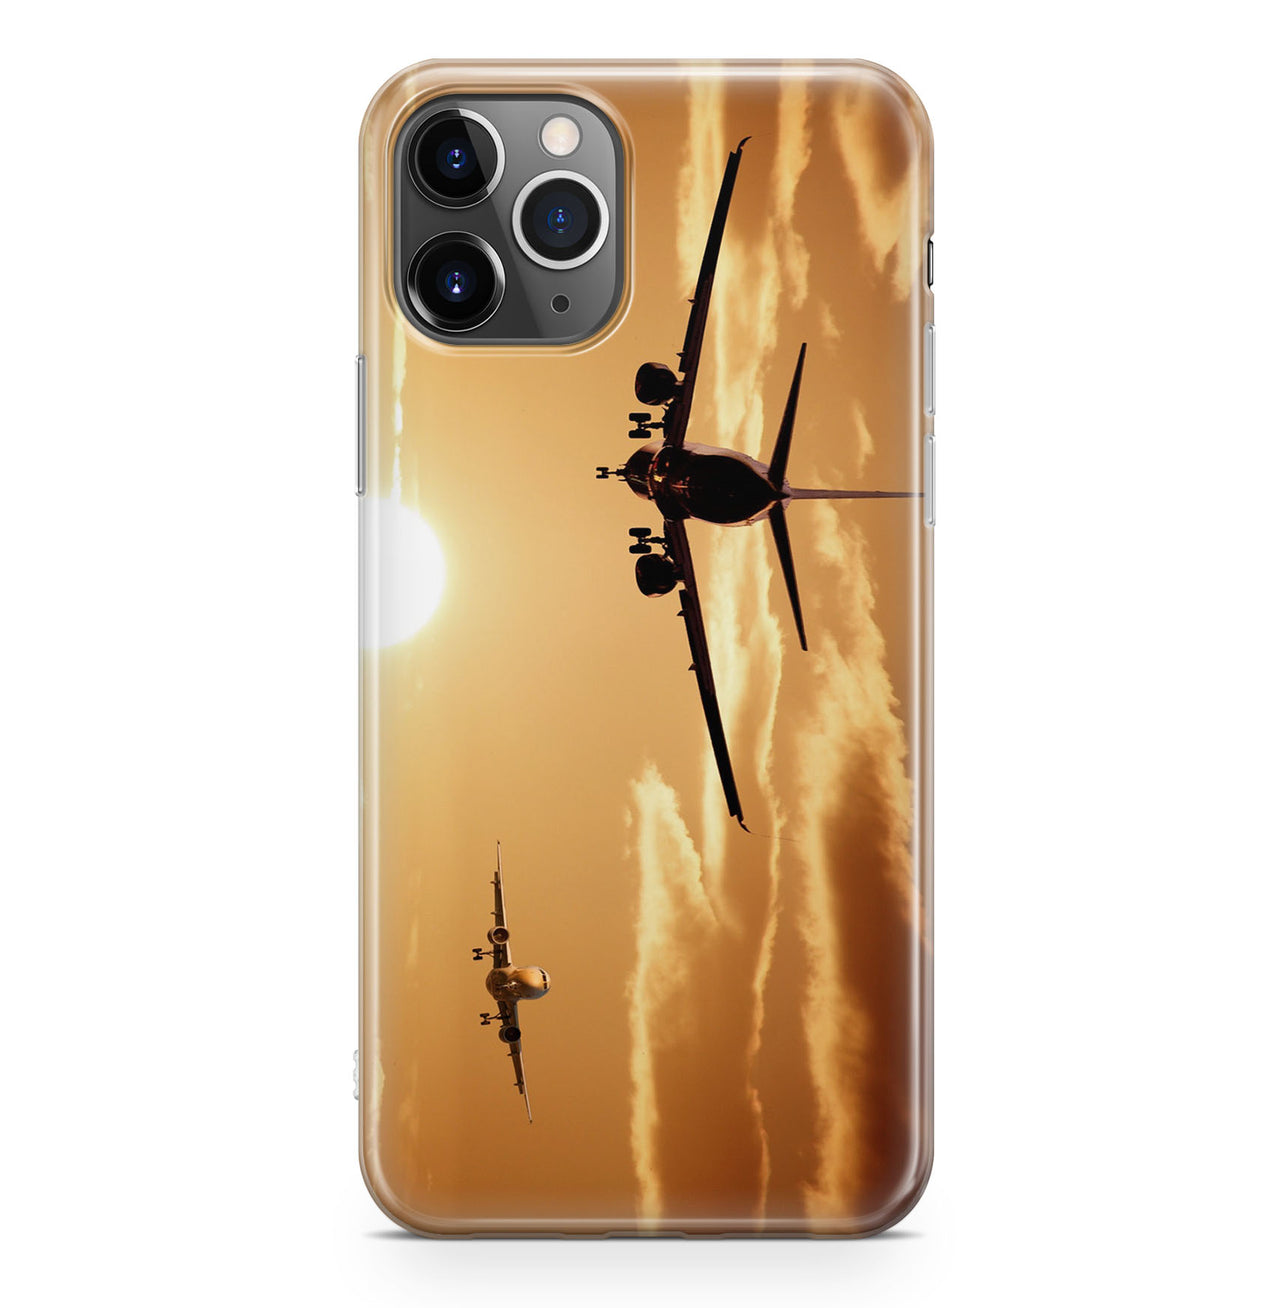 Two Aeroplanes During Sunset Designed iPhone Cases